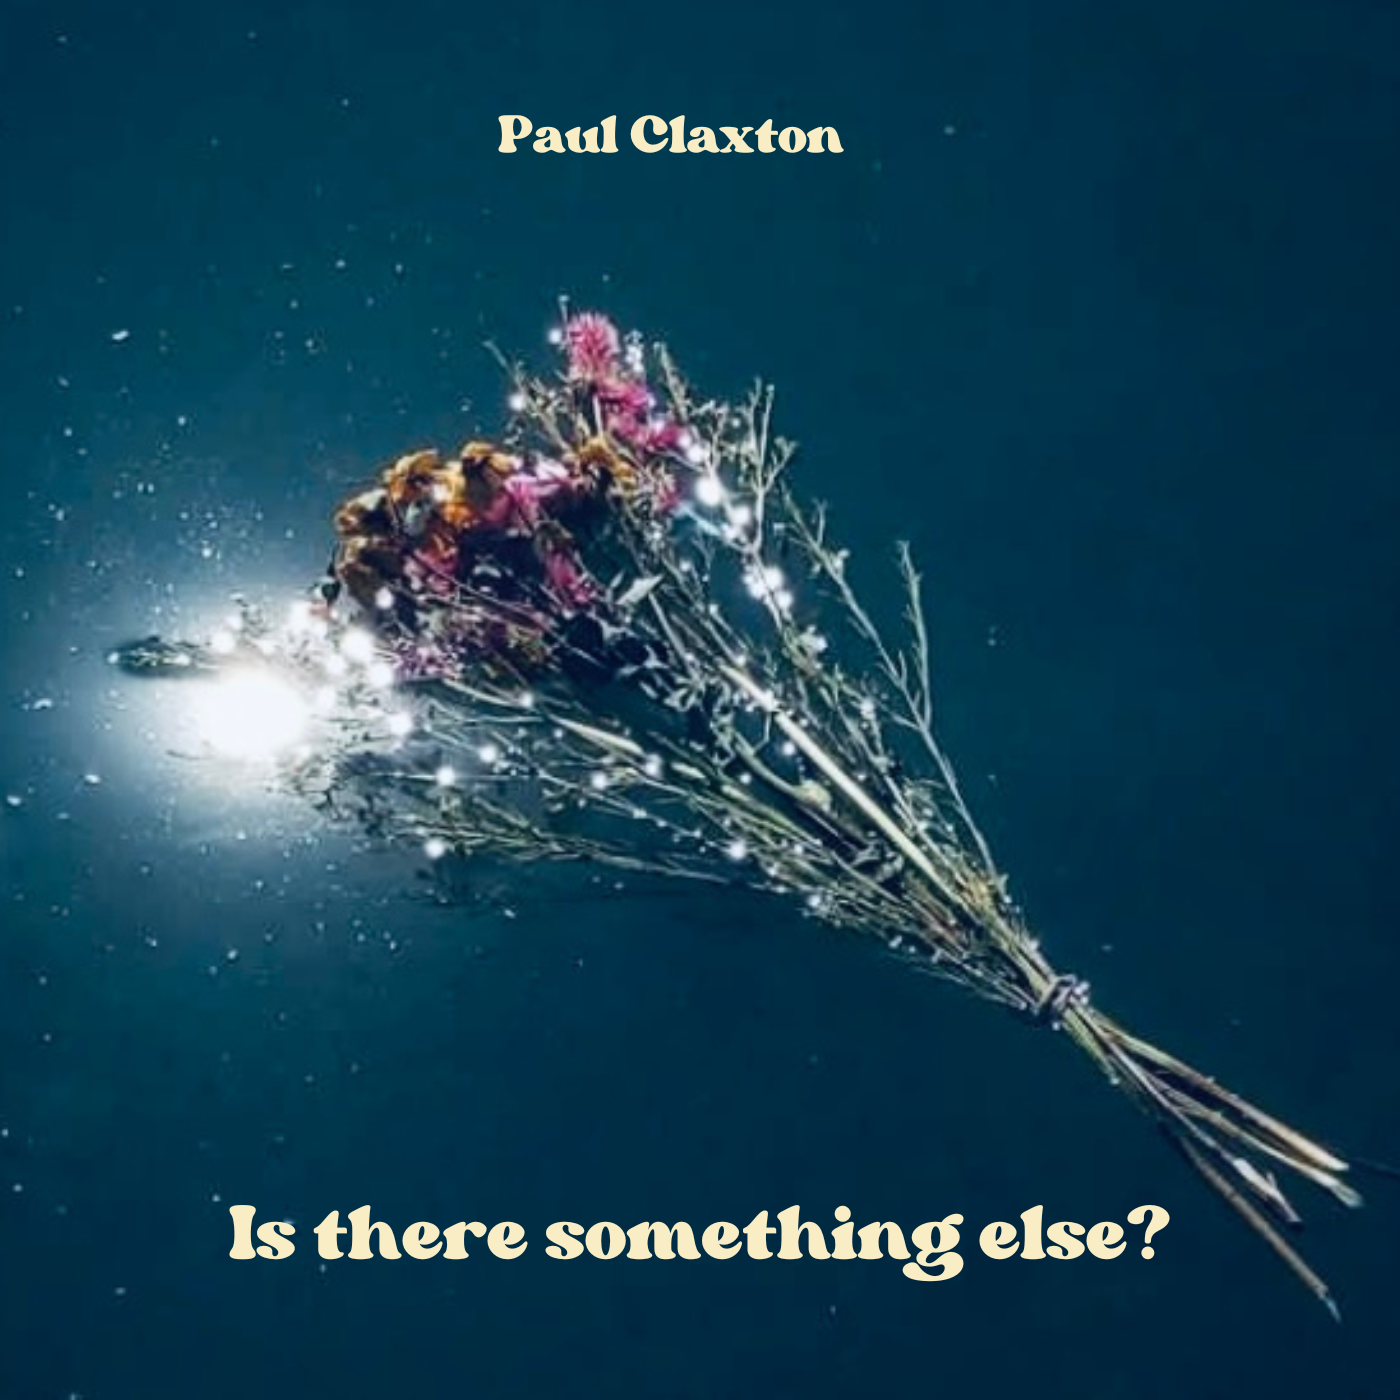 PAUL CLAXTON – “Is there something else?”